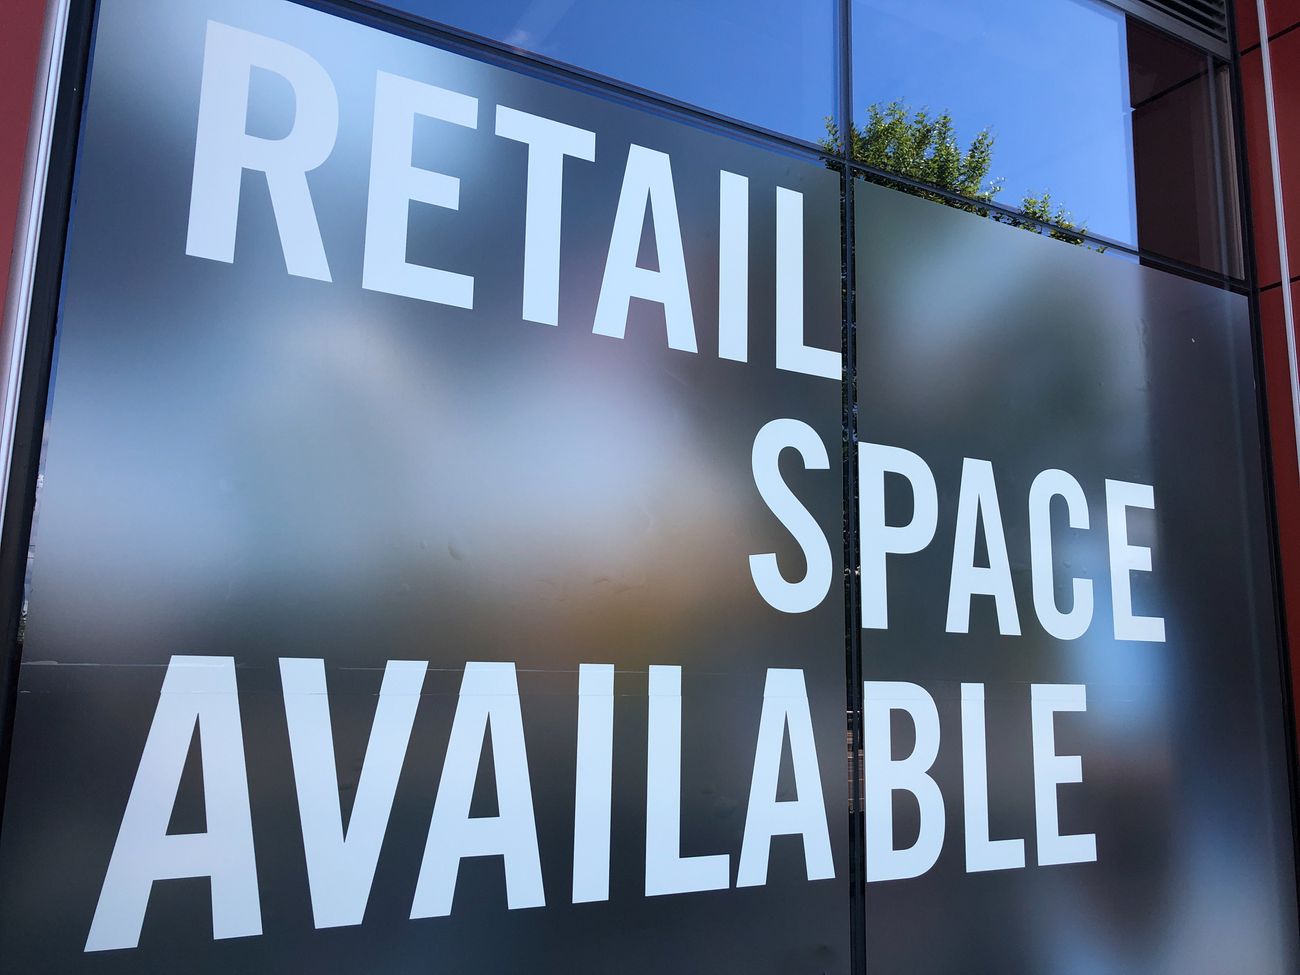 A sign in a glass storefront window reads "Retail Space Available."